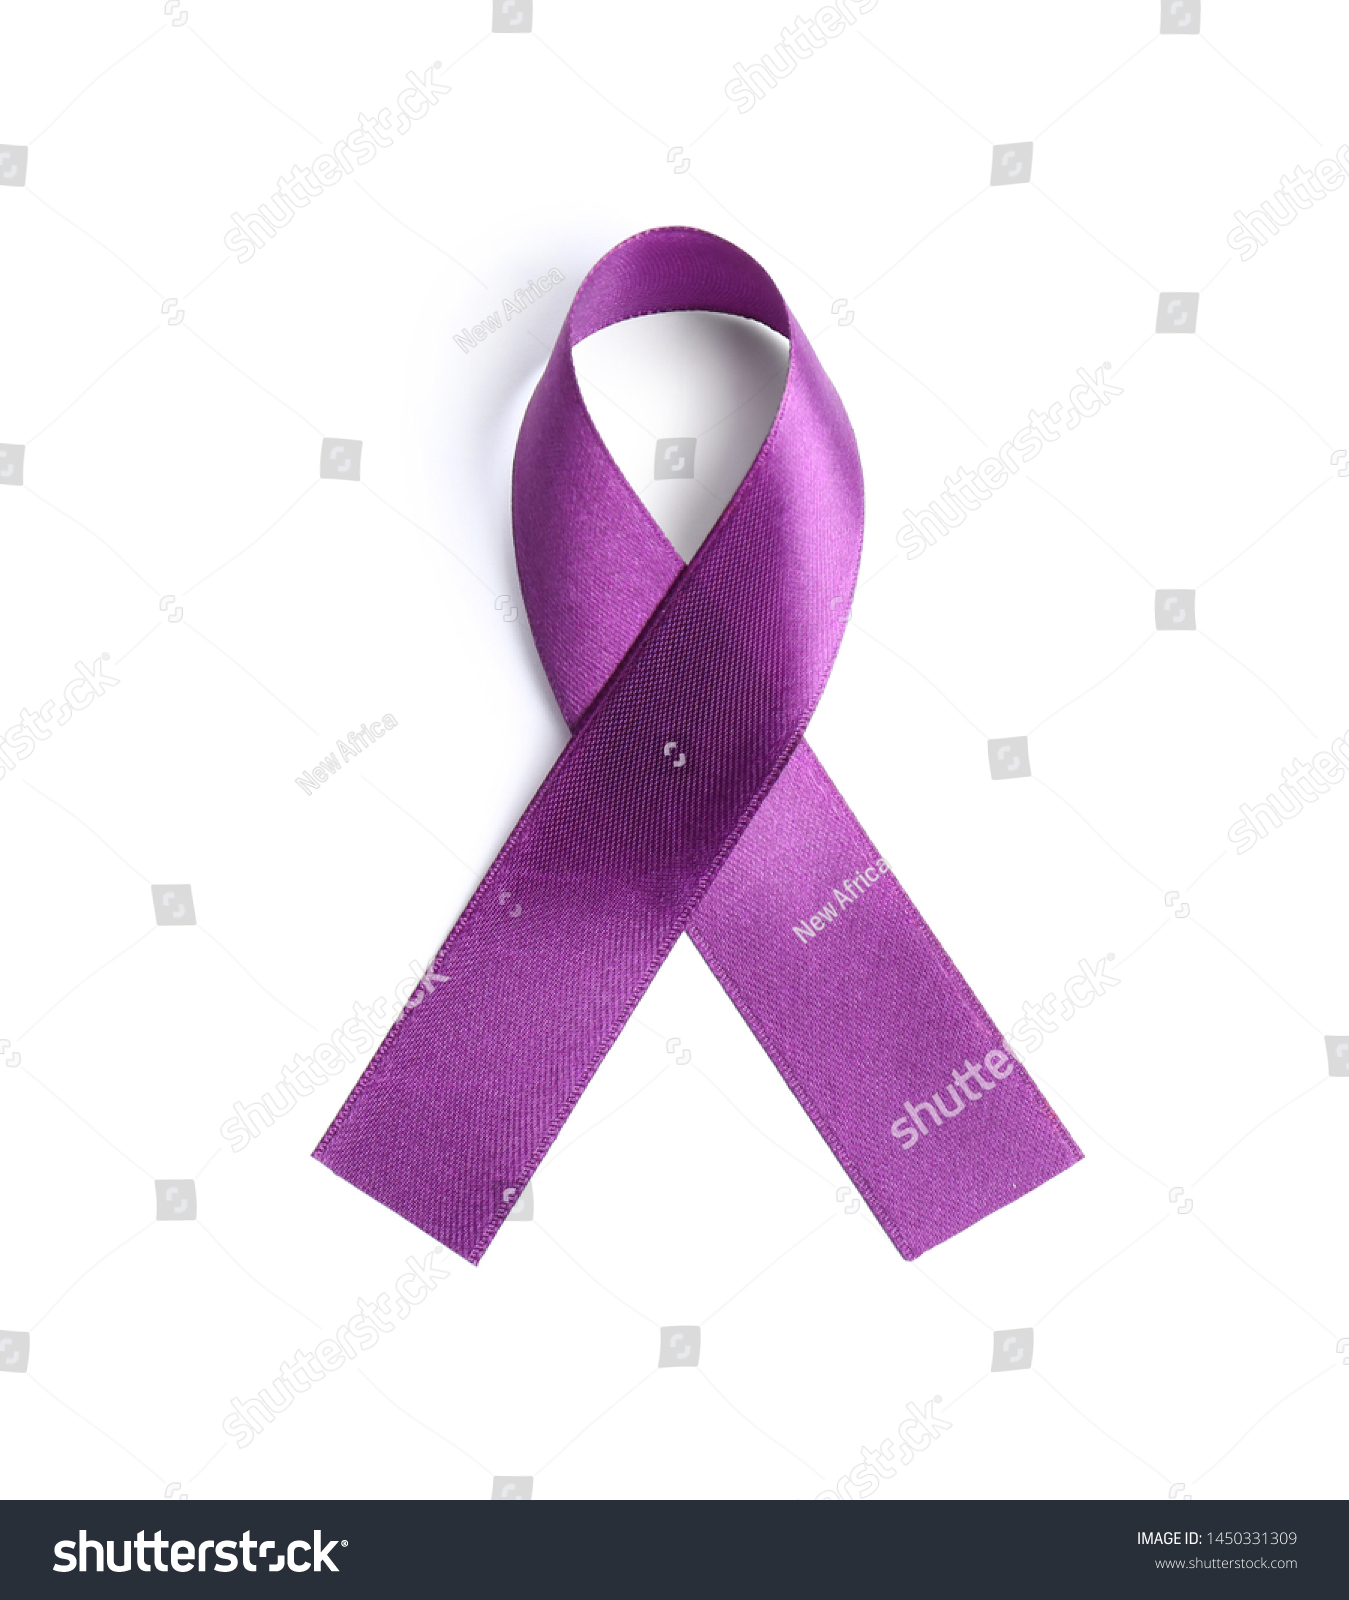 Purple awareness ribbon on white background, top view #1450331309